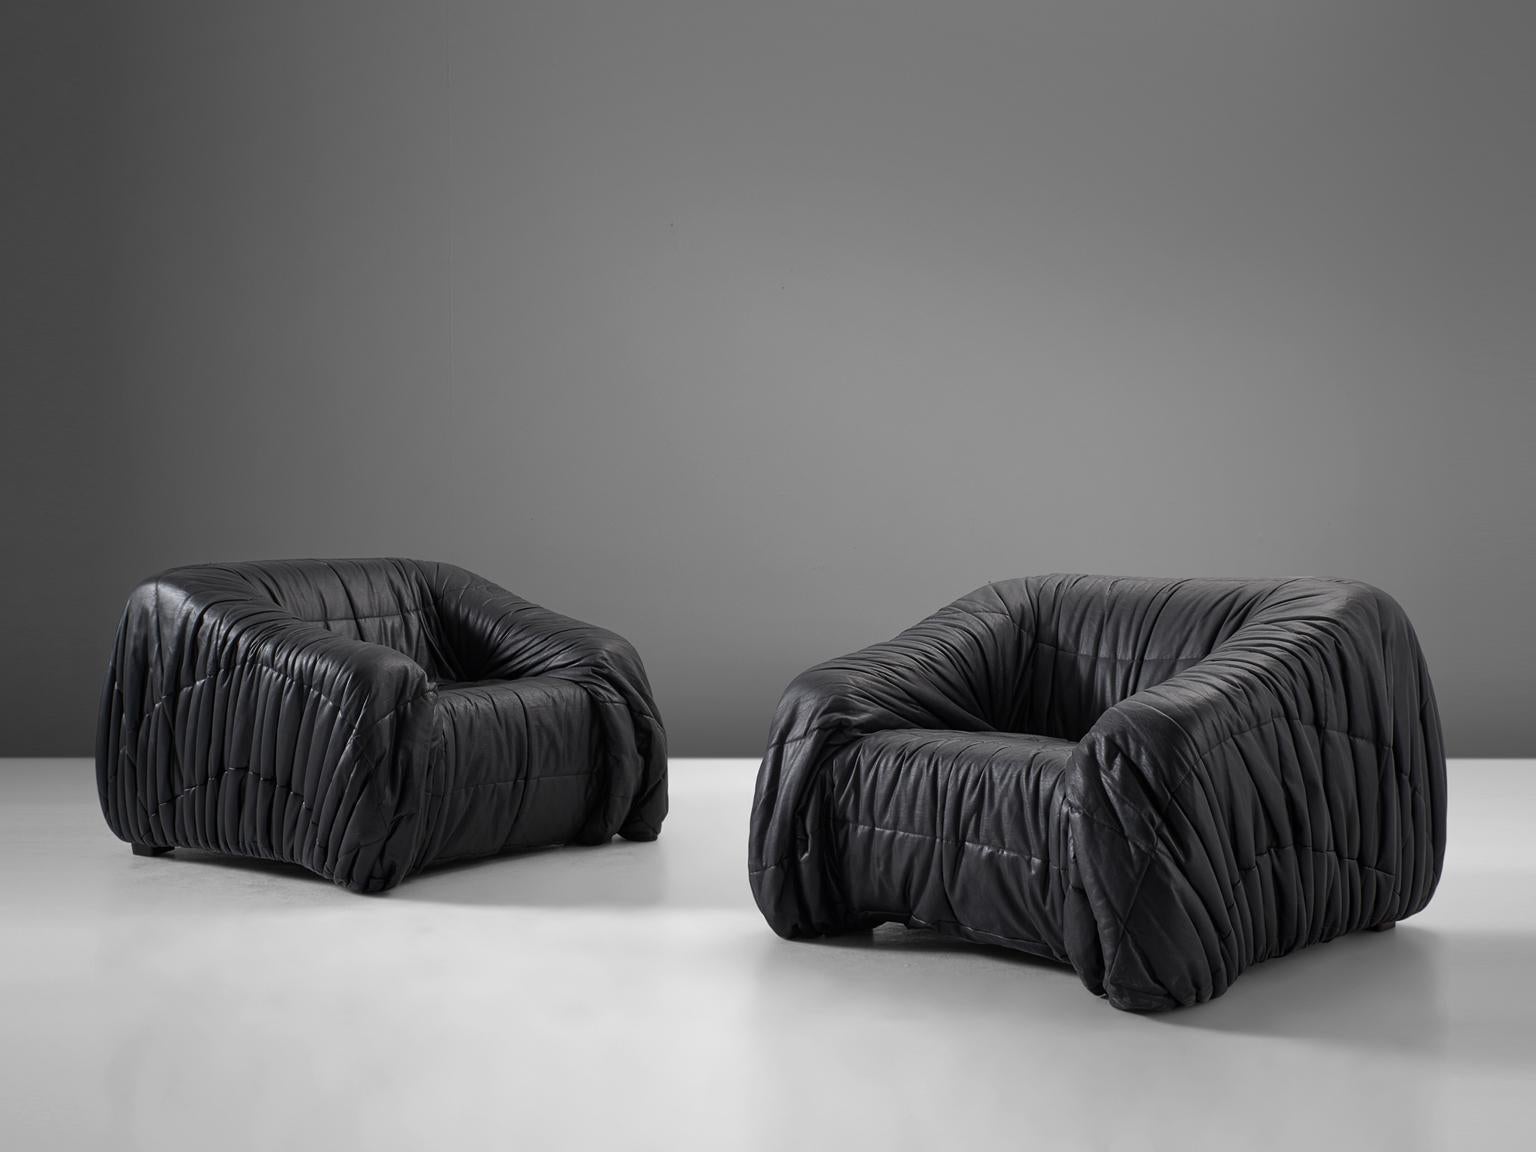 Jonathan de Pas, Donato D'urbino & Paolo Lomazzi for Dell'Oca, pair of lounge chairs 'Piumino', leatherette, Italy, 1970s

These lounge chairs are completely moulded out of foam and covered with folded black, thick but soft leatherette. One of the